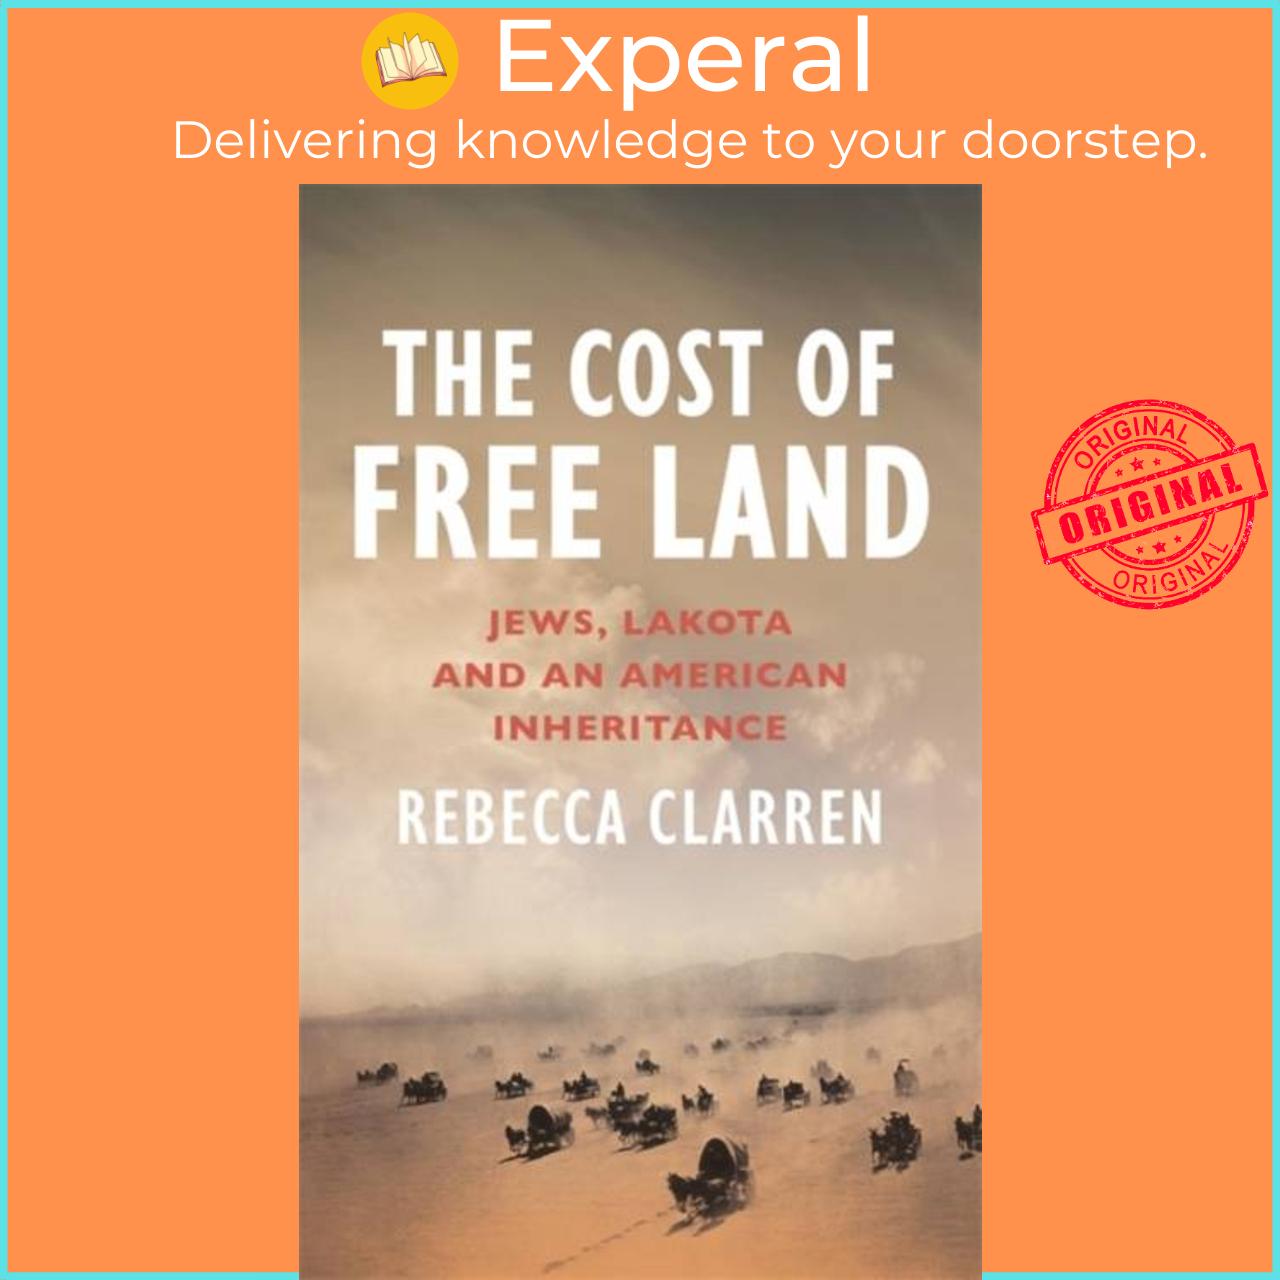 Sách - The Cost of Free Land - Jews, Lakota and an American Inheritance by Rebecca Clarren (UK edition, paperback)